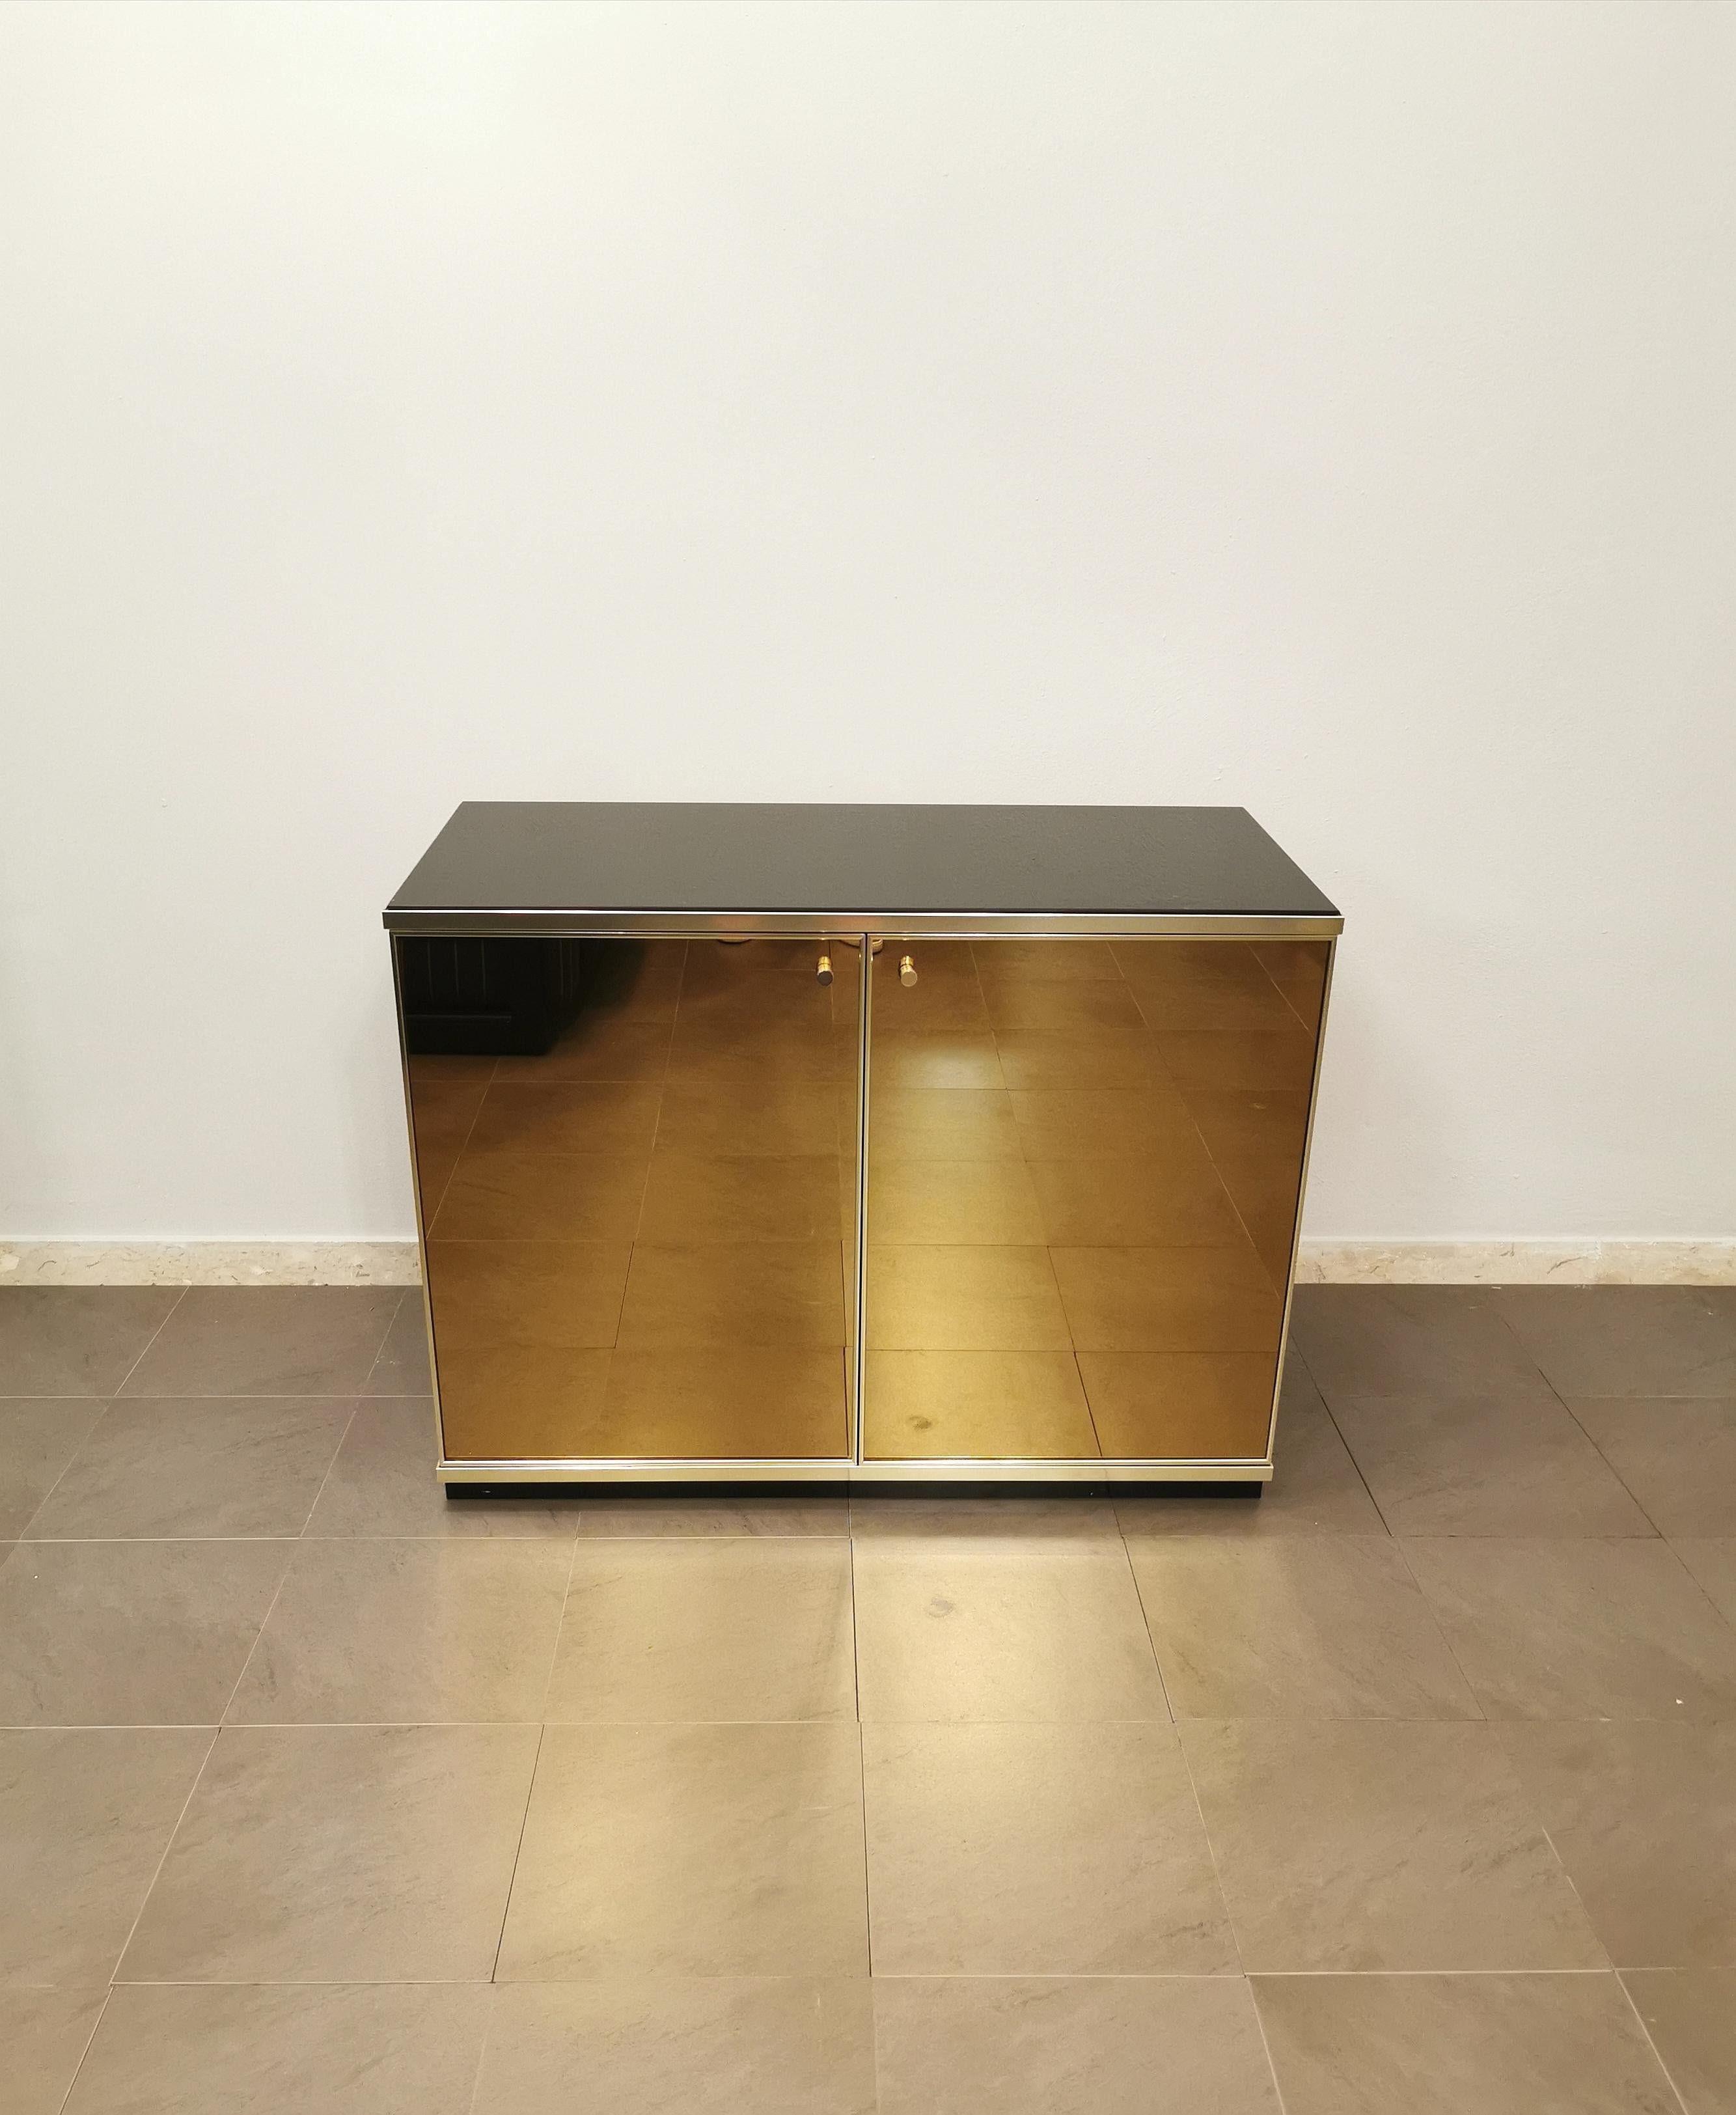 Elegant buffet / sideboard designed by the Italian designer Renato Zevi in the 70s. The buffet has a black lacquered wooden structure, a dark glass top, 2 bronze mirrored glass doors with sand-colored suede inside and 1 wooden shelf. Finishes in